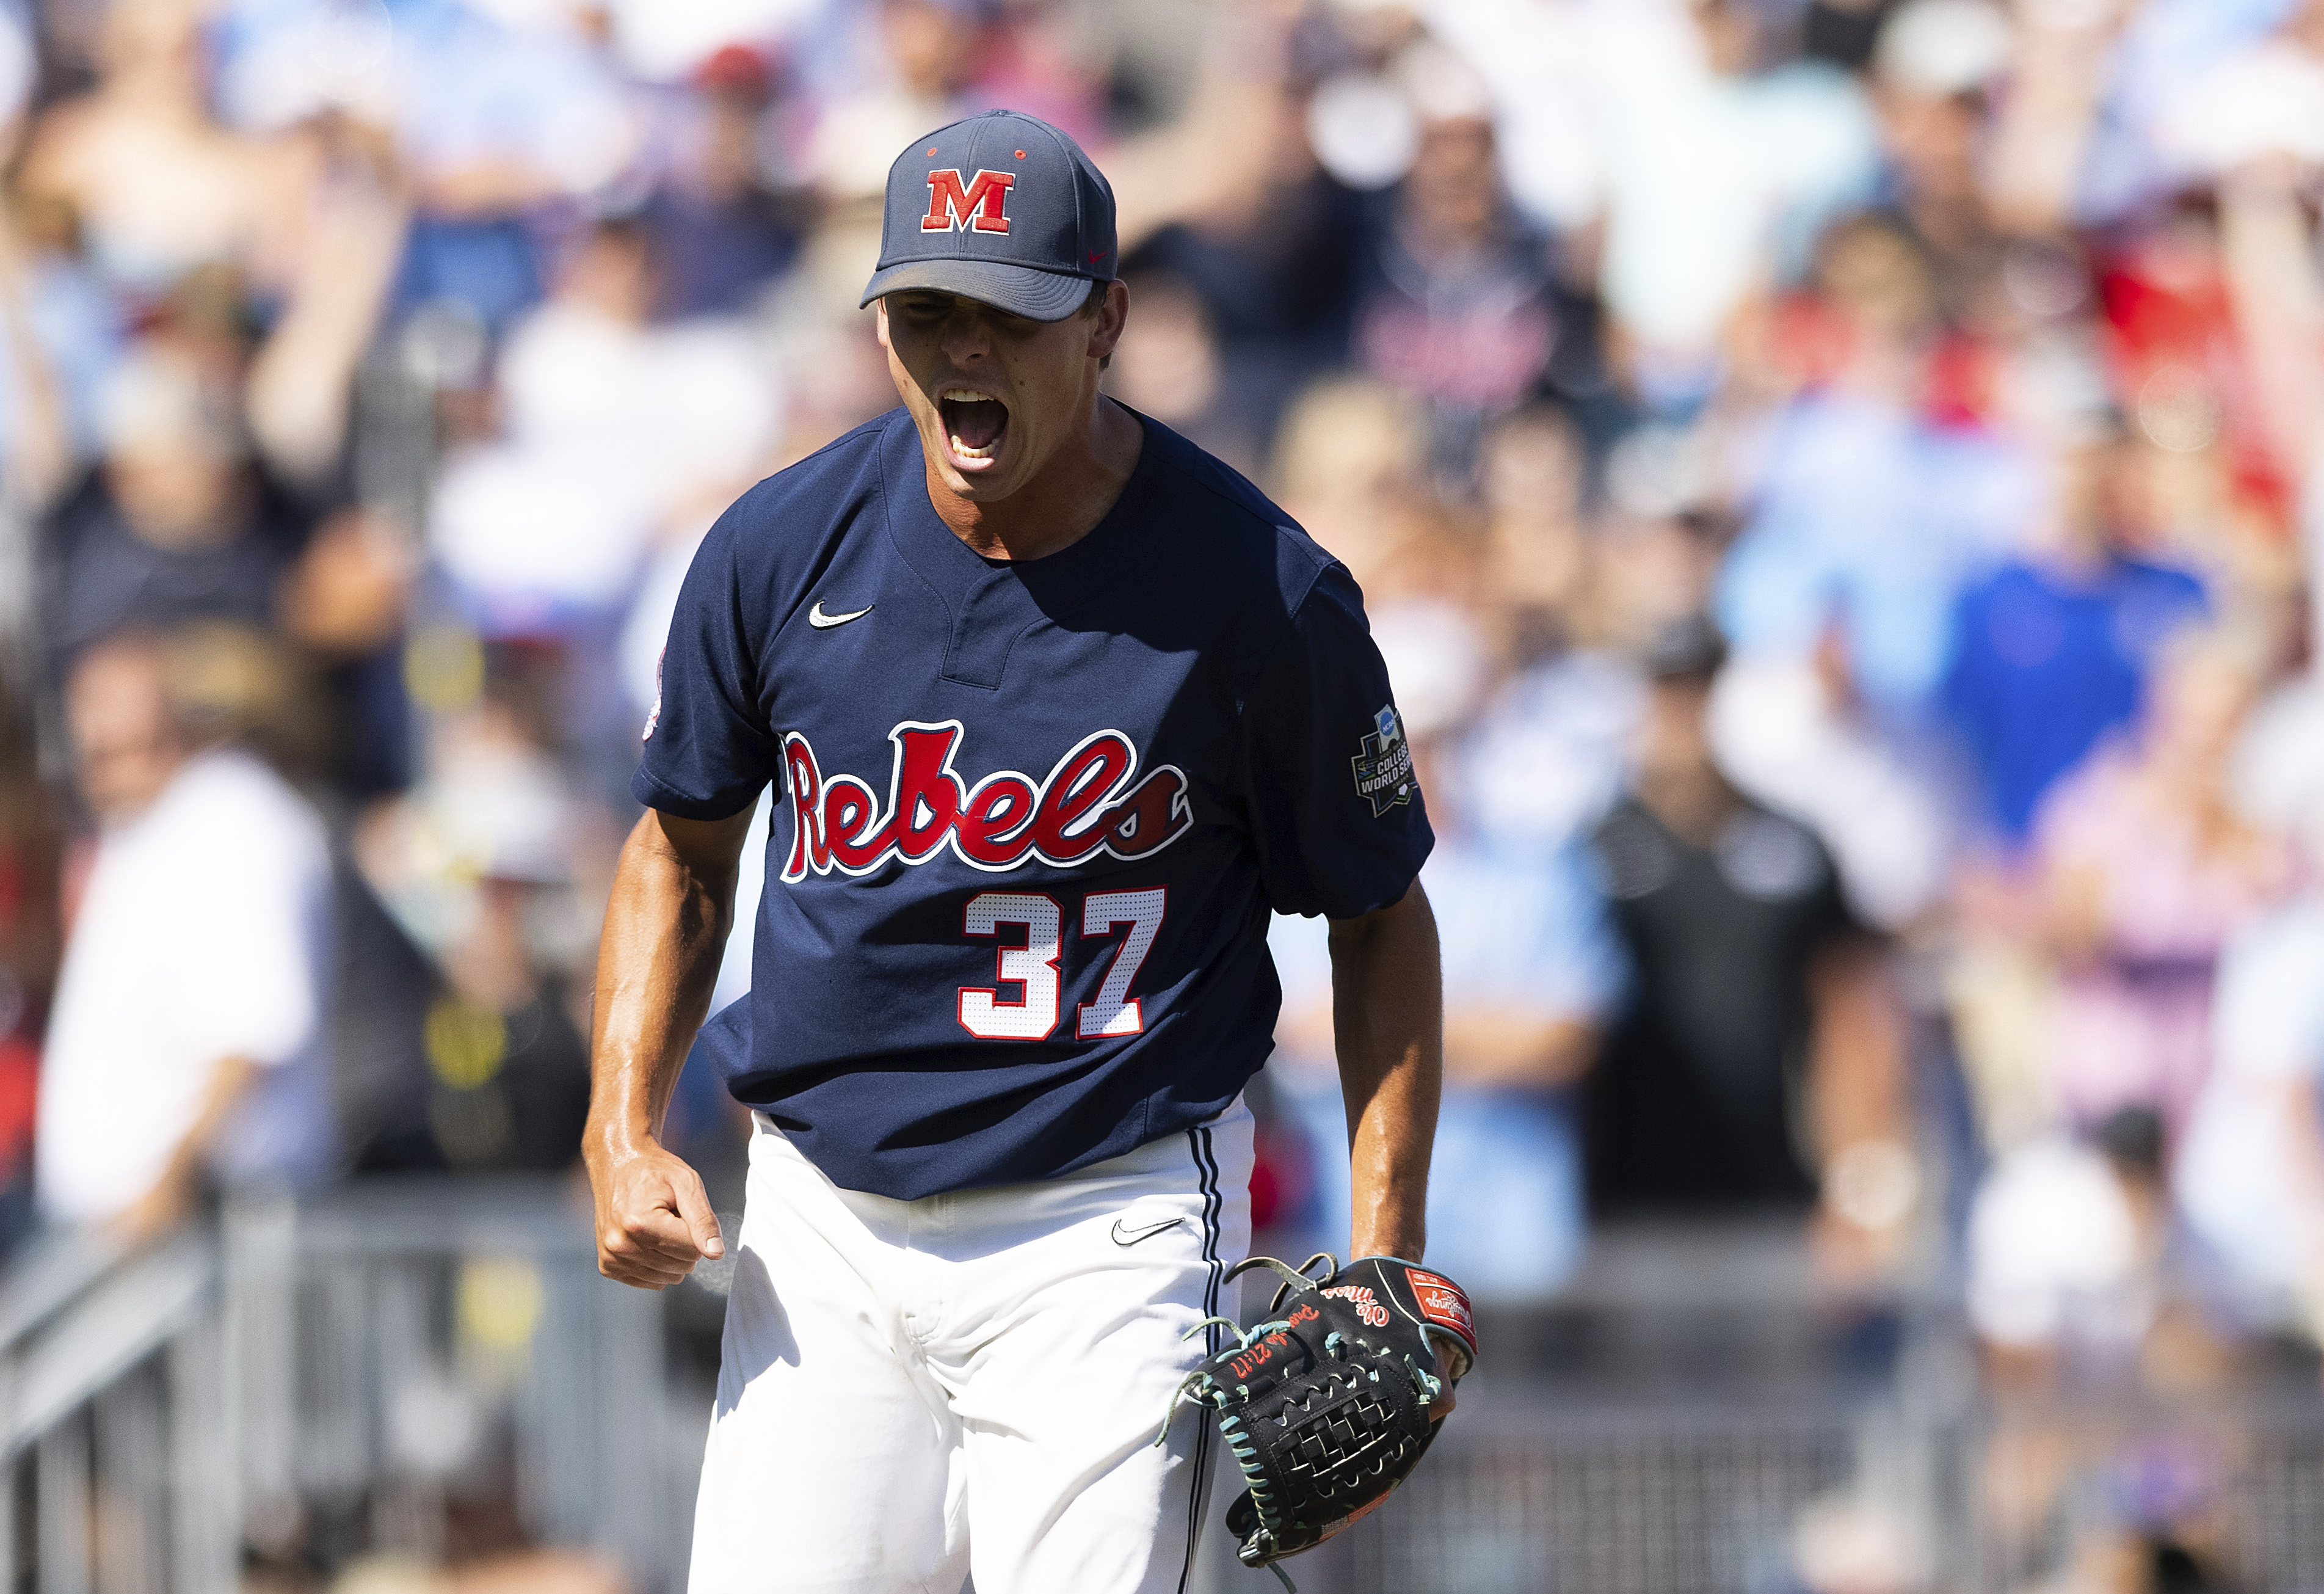 Ole Miss baseball fans say Liberty ripped off Rebels' blue uniforms